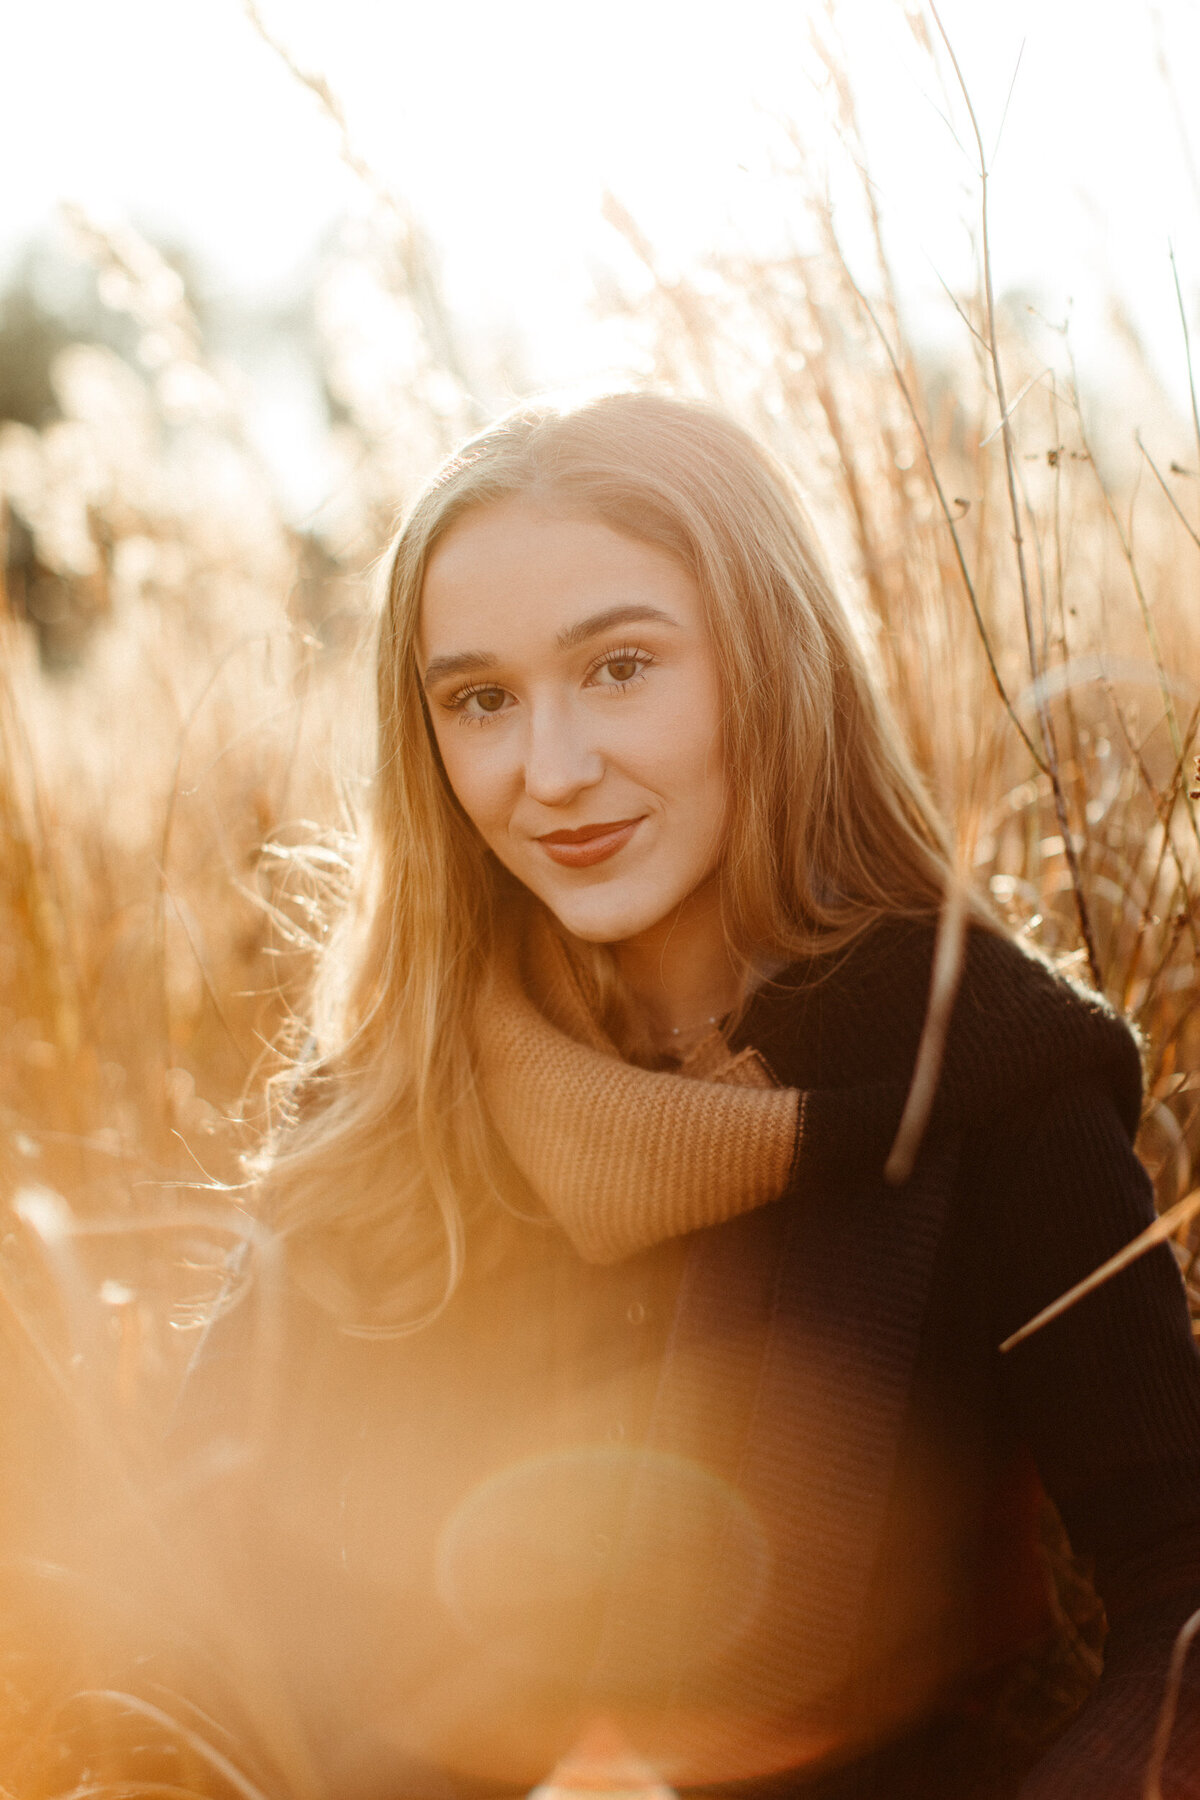 High school senior wearing a black sweater dress and scarf soft smiling in a field at sunset